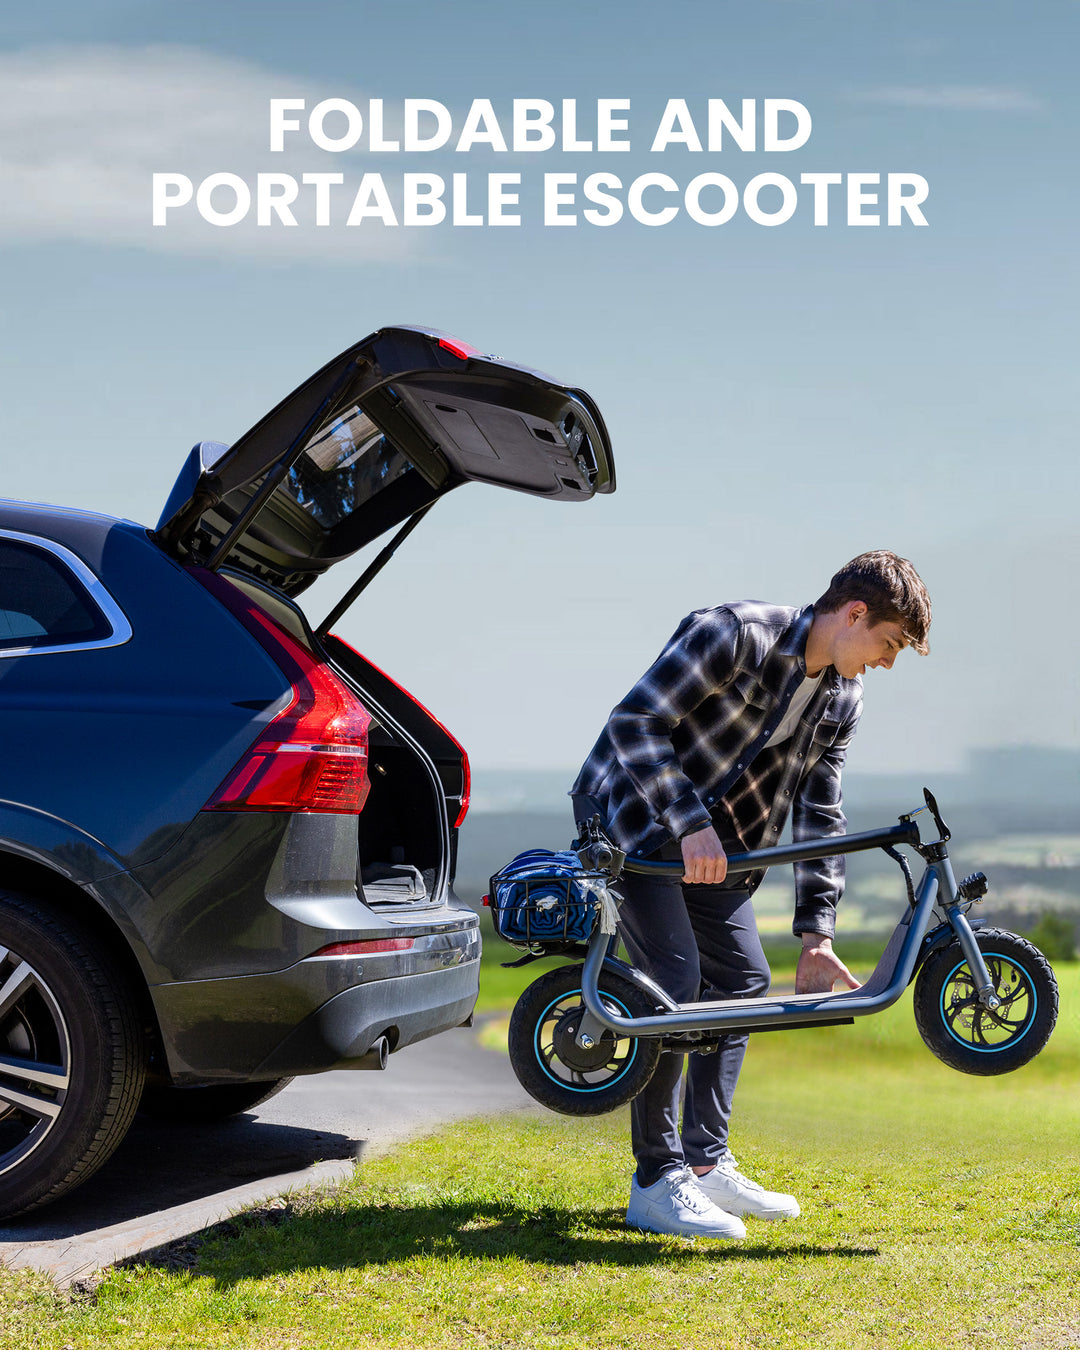 Gyroor X2 Electric Scooter 550W with 12inch Tires—UL2272